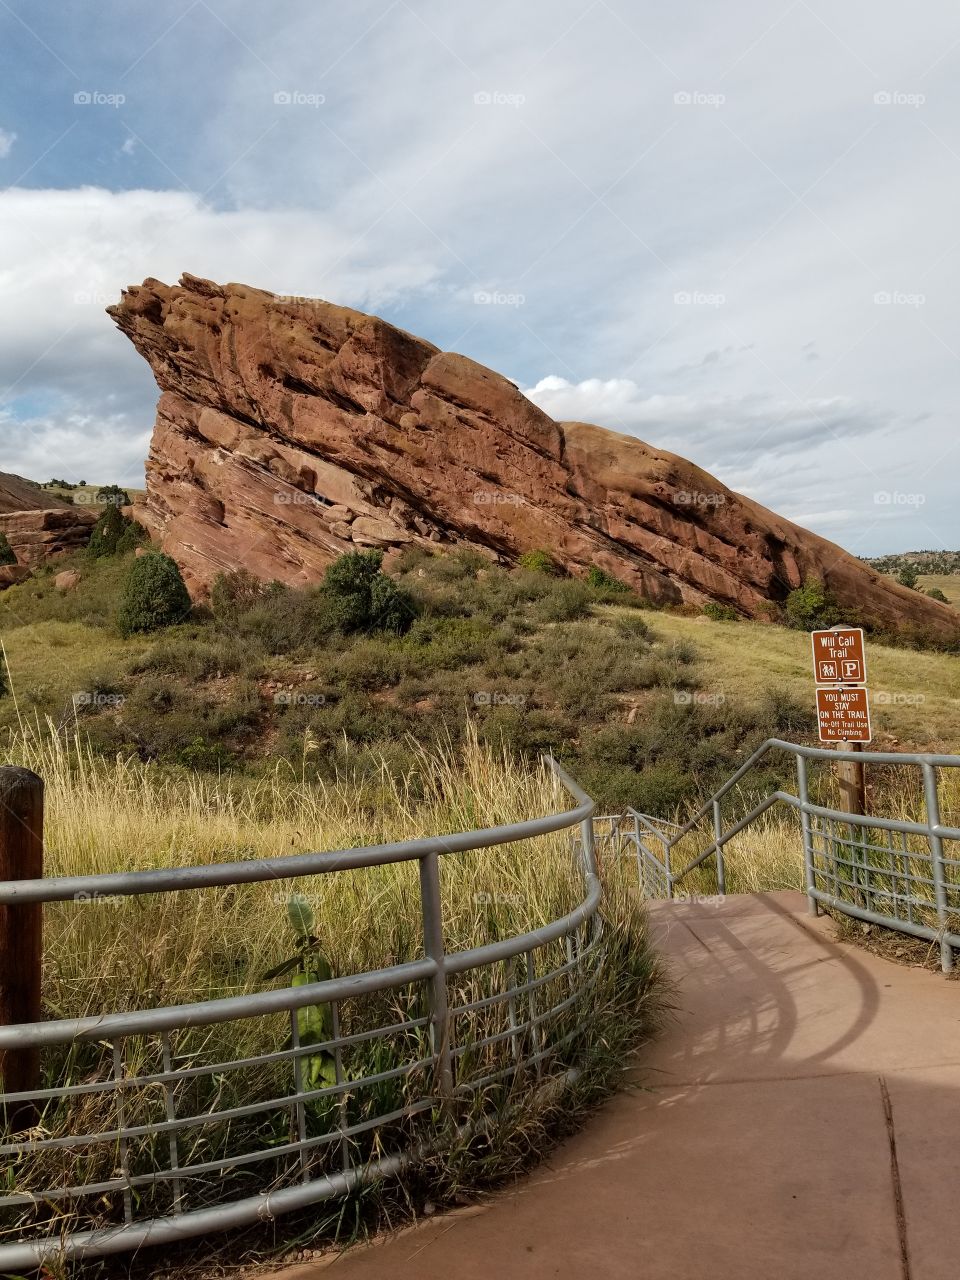 ￼

The Will Call trail is located in Red Rocks Park near Denver, Colorado. 


￼

The Will Call trail is located in Red Rocks Park near Denver, Colorado. 

Will Call - Red Rocks Park - Denver